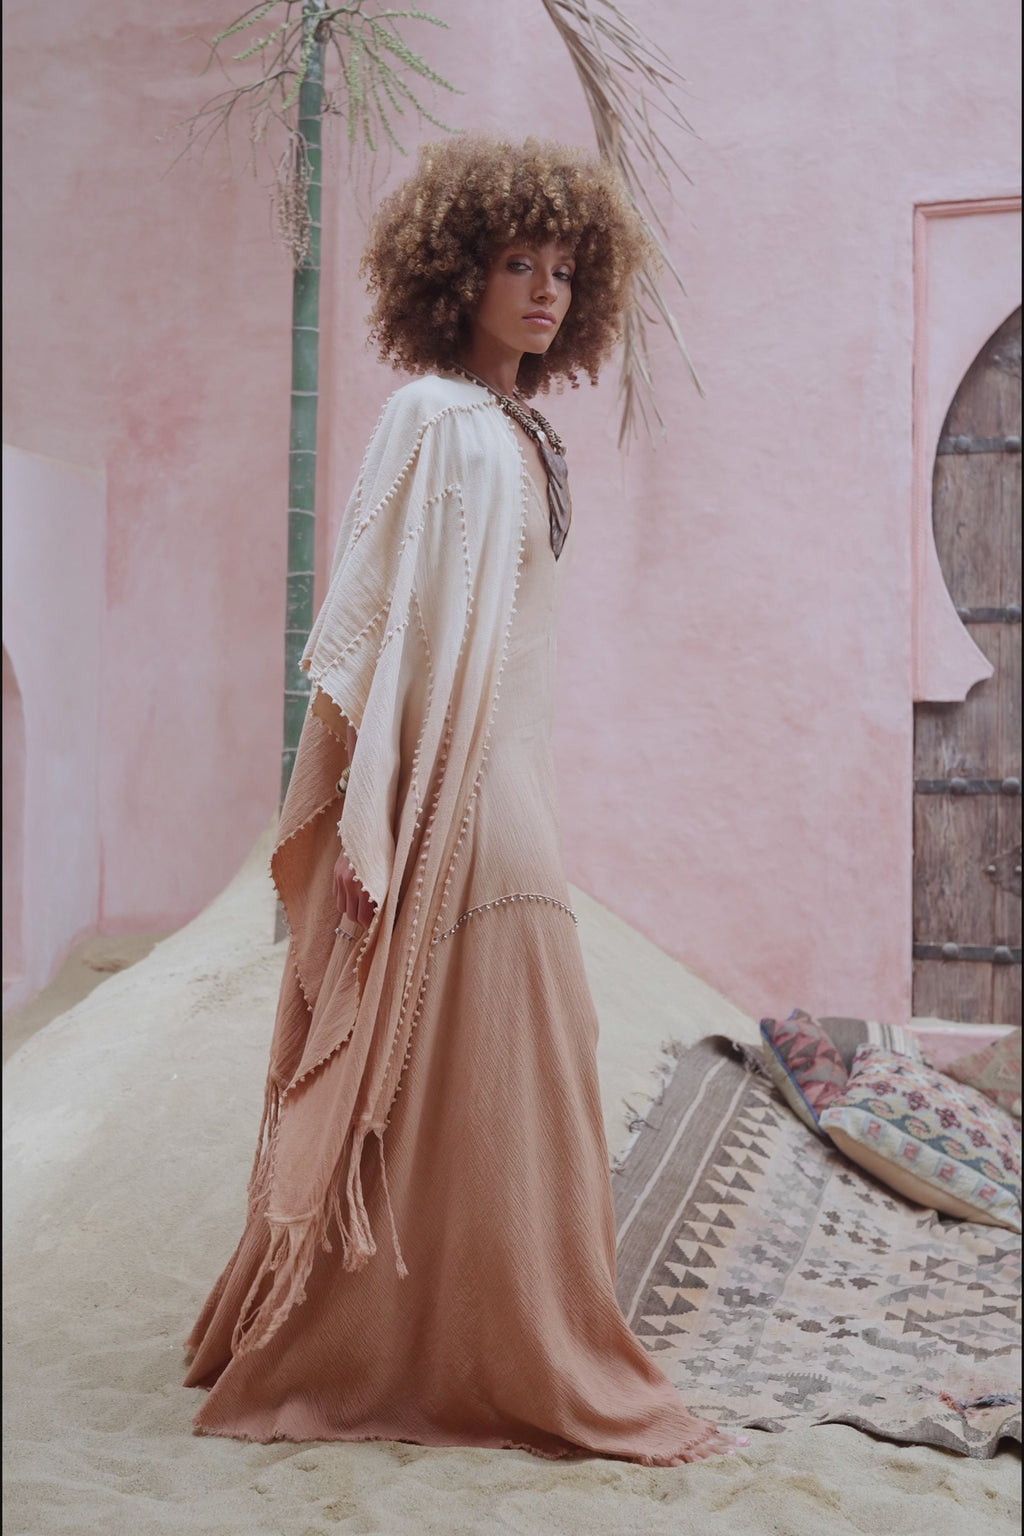 Step out in style with Aya Sacred Wear's Powder Pink Poncho Robe.